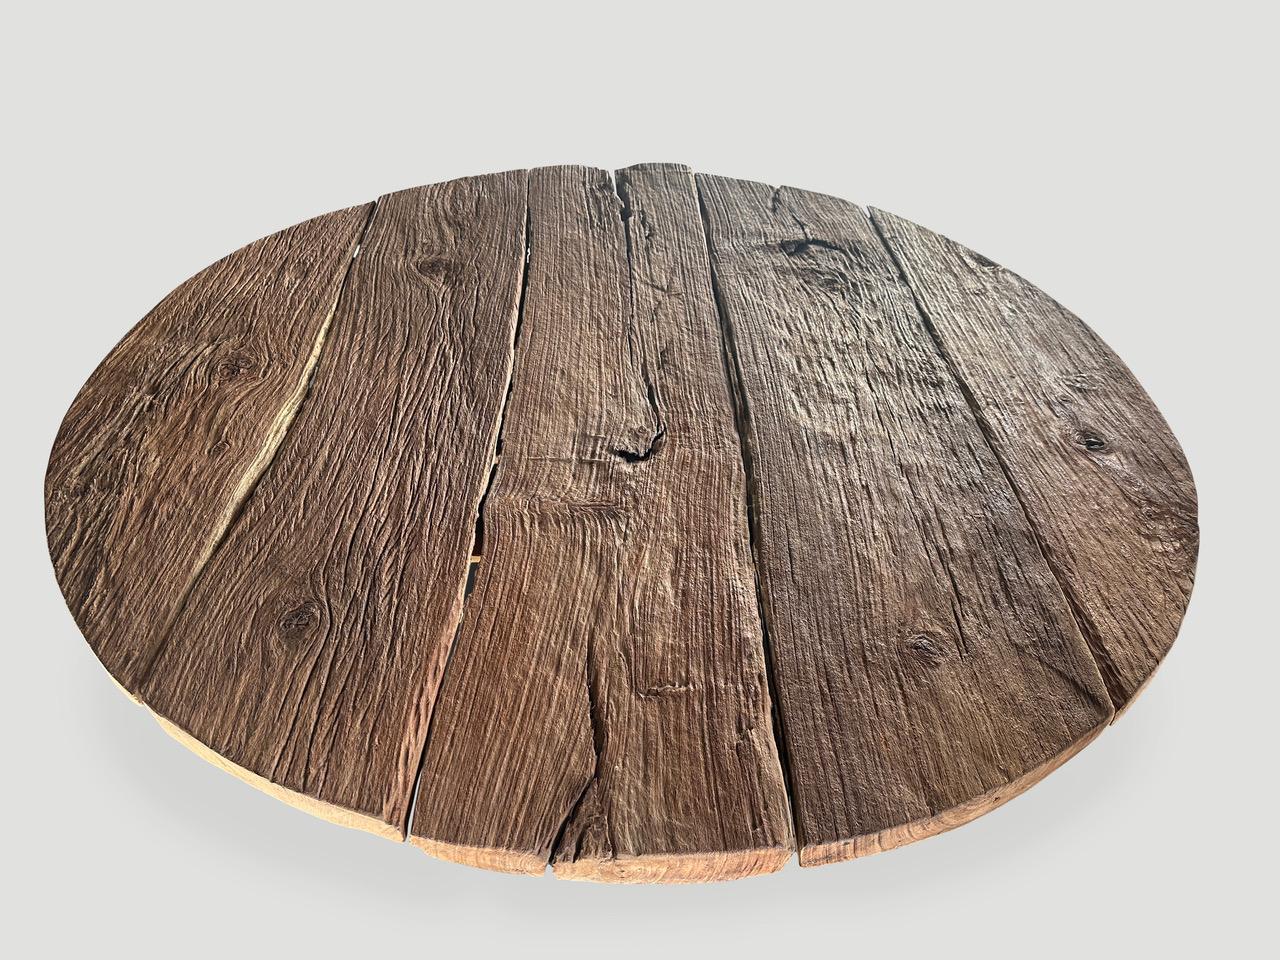 Andrianna Shamaris Wabi Sabi Round Teak Wood Table  In Excellent Condition For Sale In New York, NY